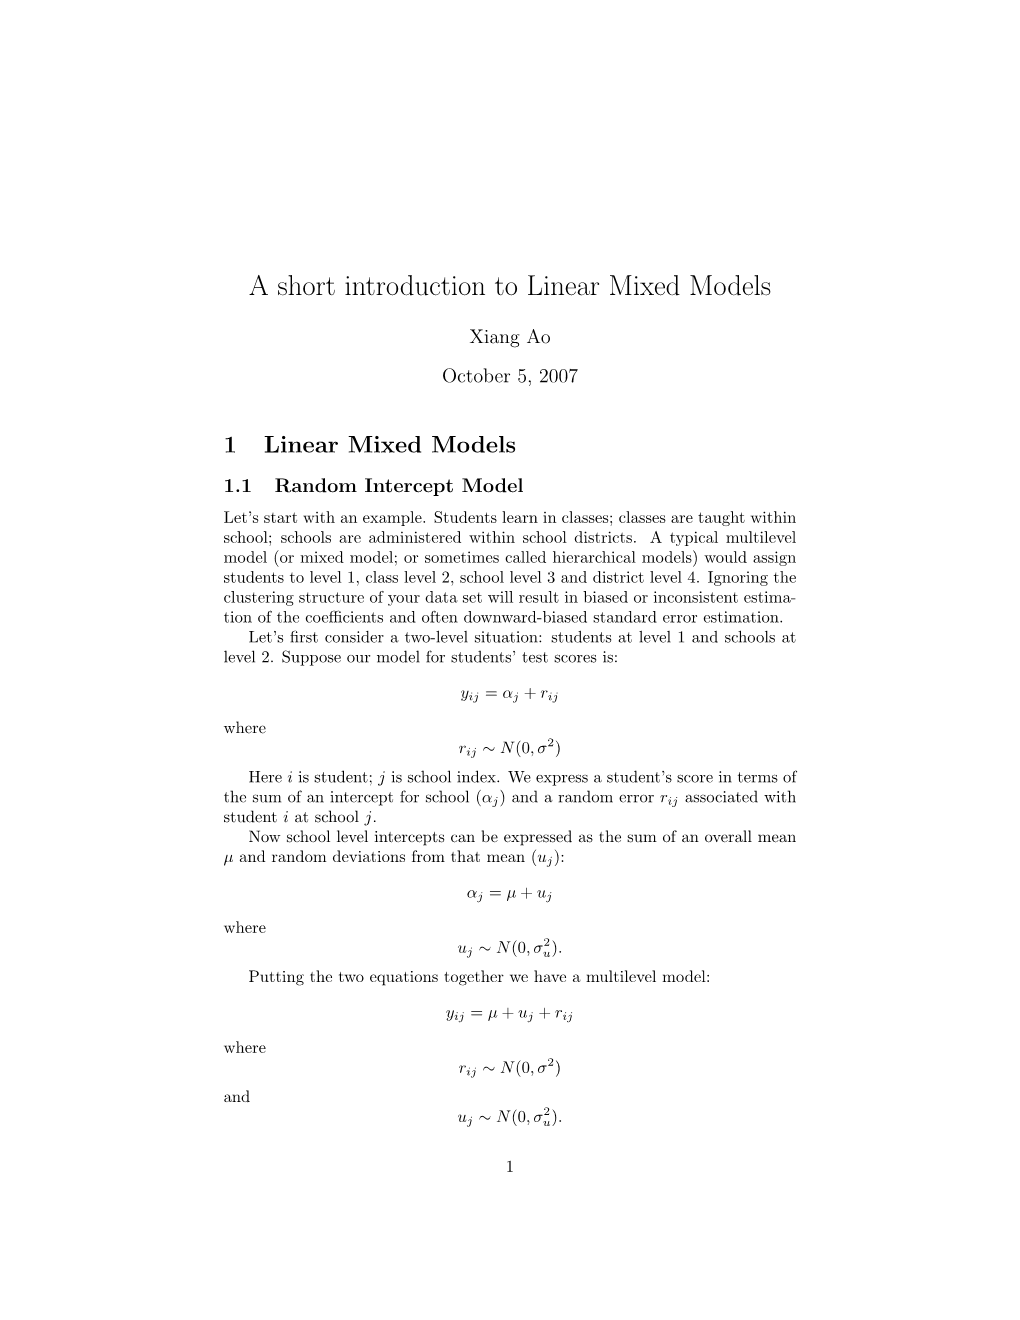 A Short Introduction to Linear Mixed Models